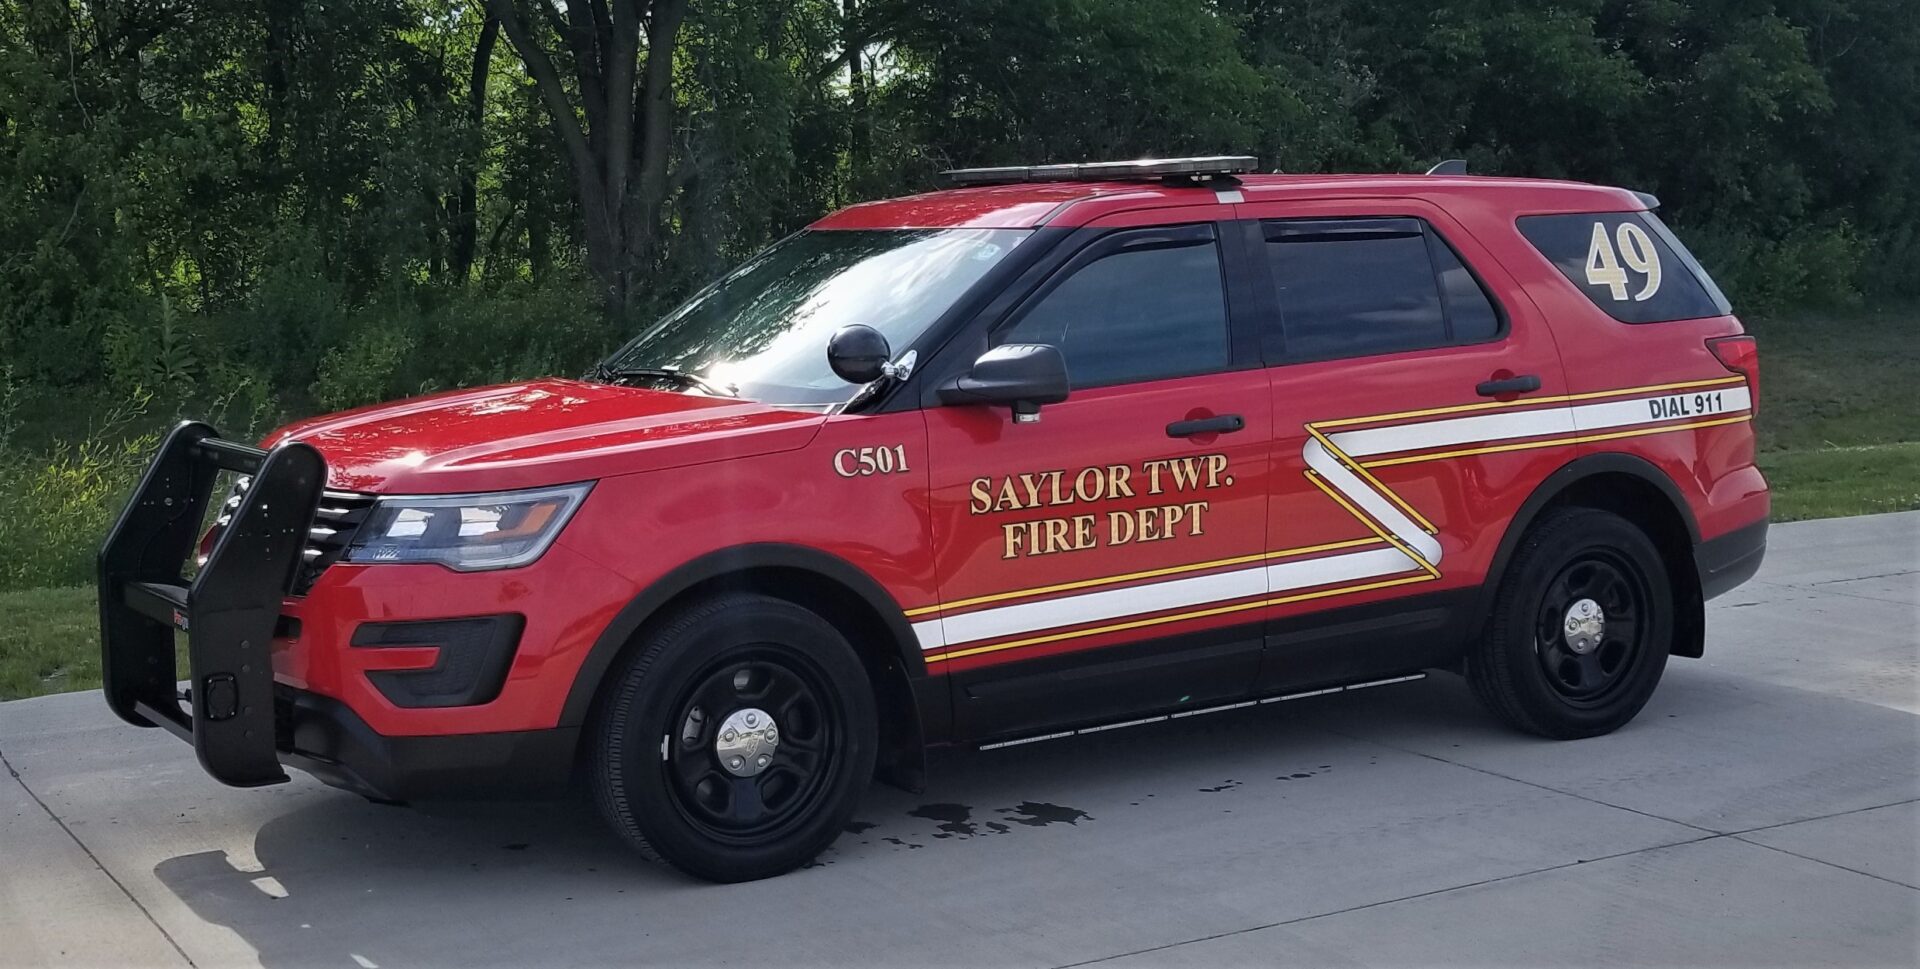 A red police car with the words " savlor twp fire dept." on it.